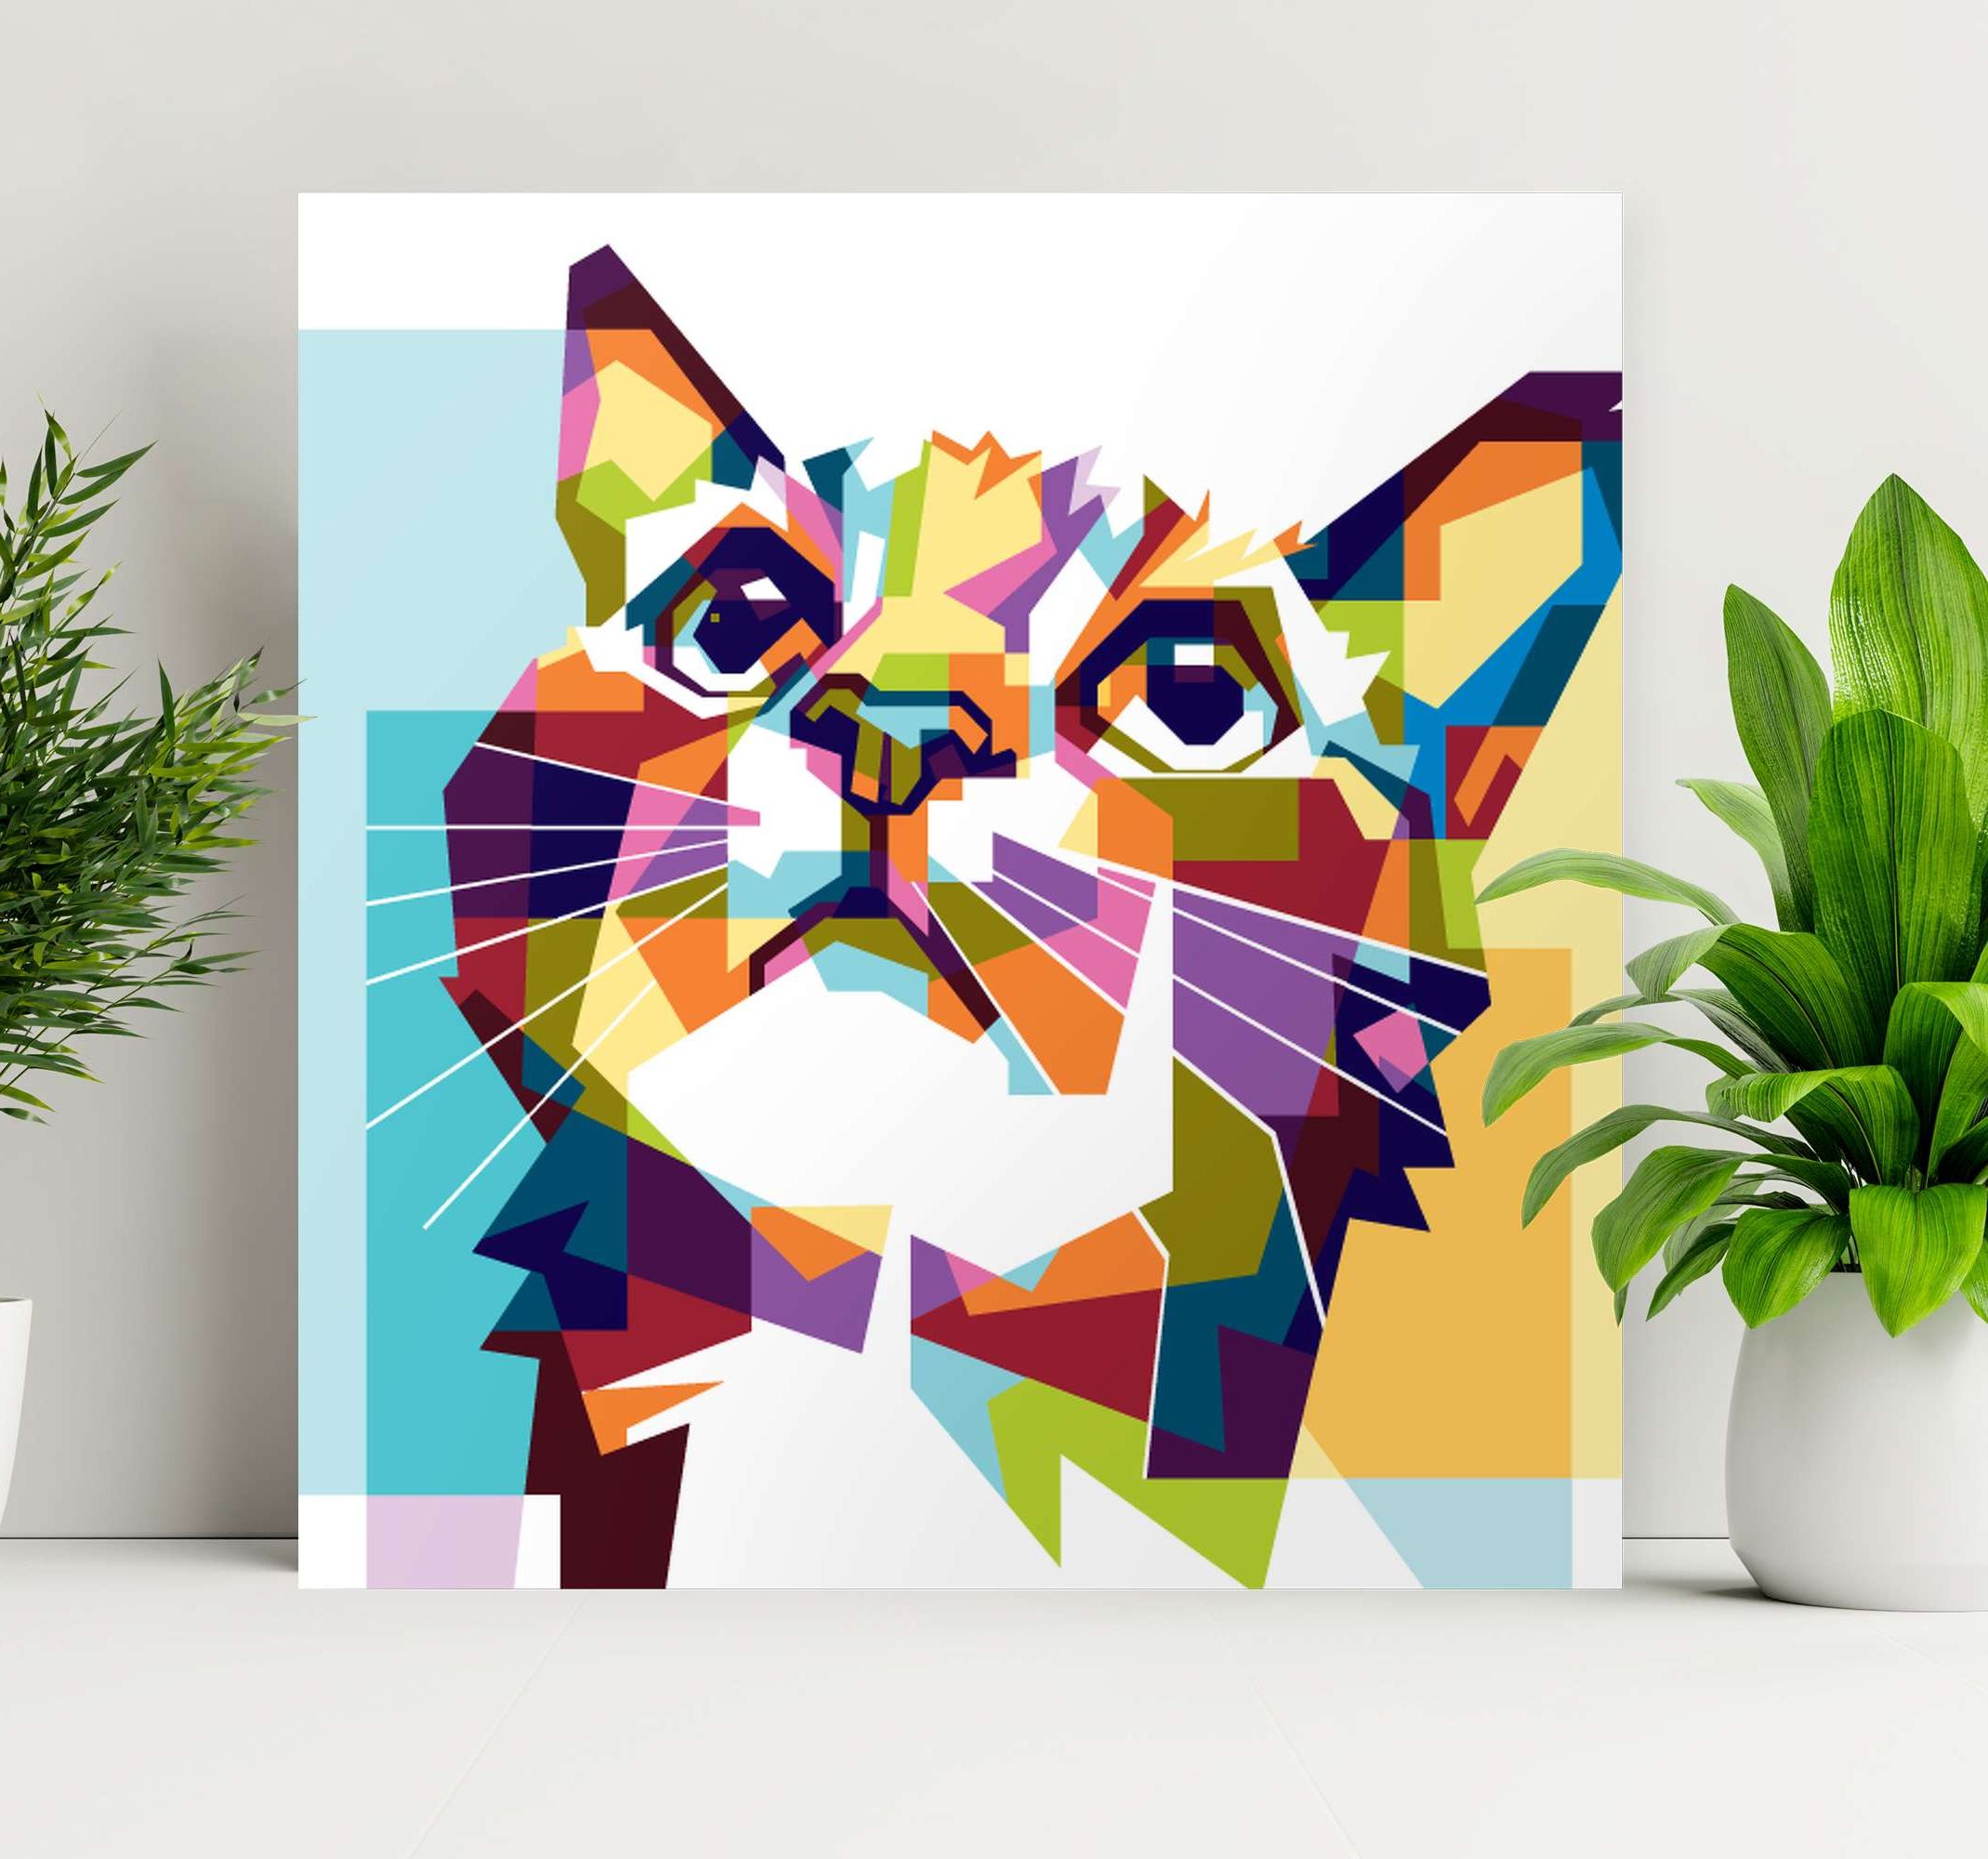 Cats Wall Art Pertaining To Latest Geometric Cat Wall Art Canvas – Tenstickers (View 11 of 15)